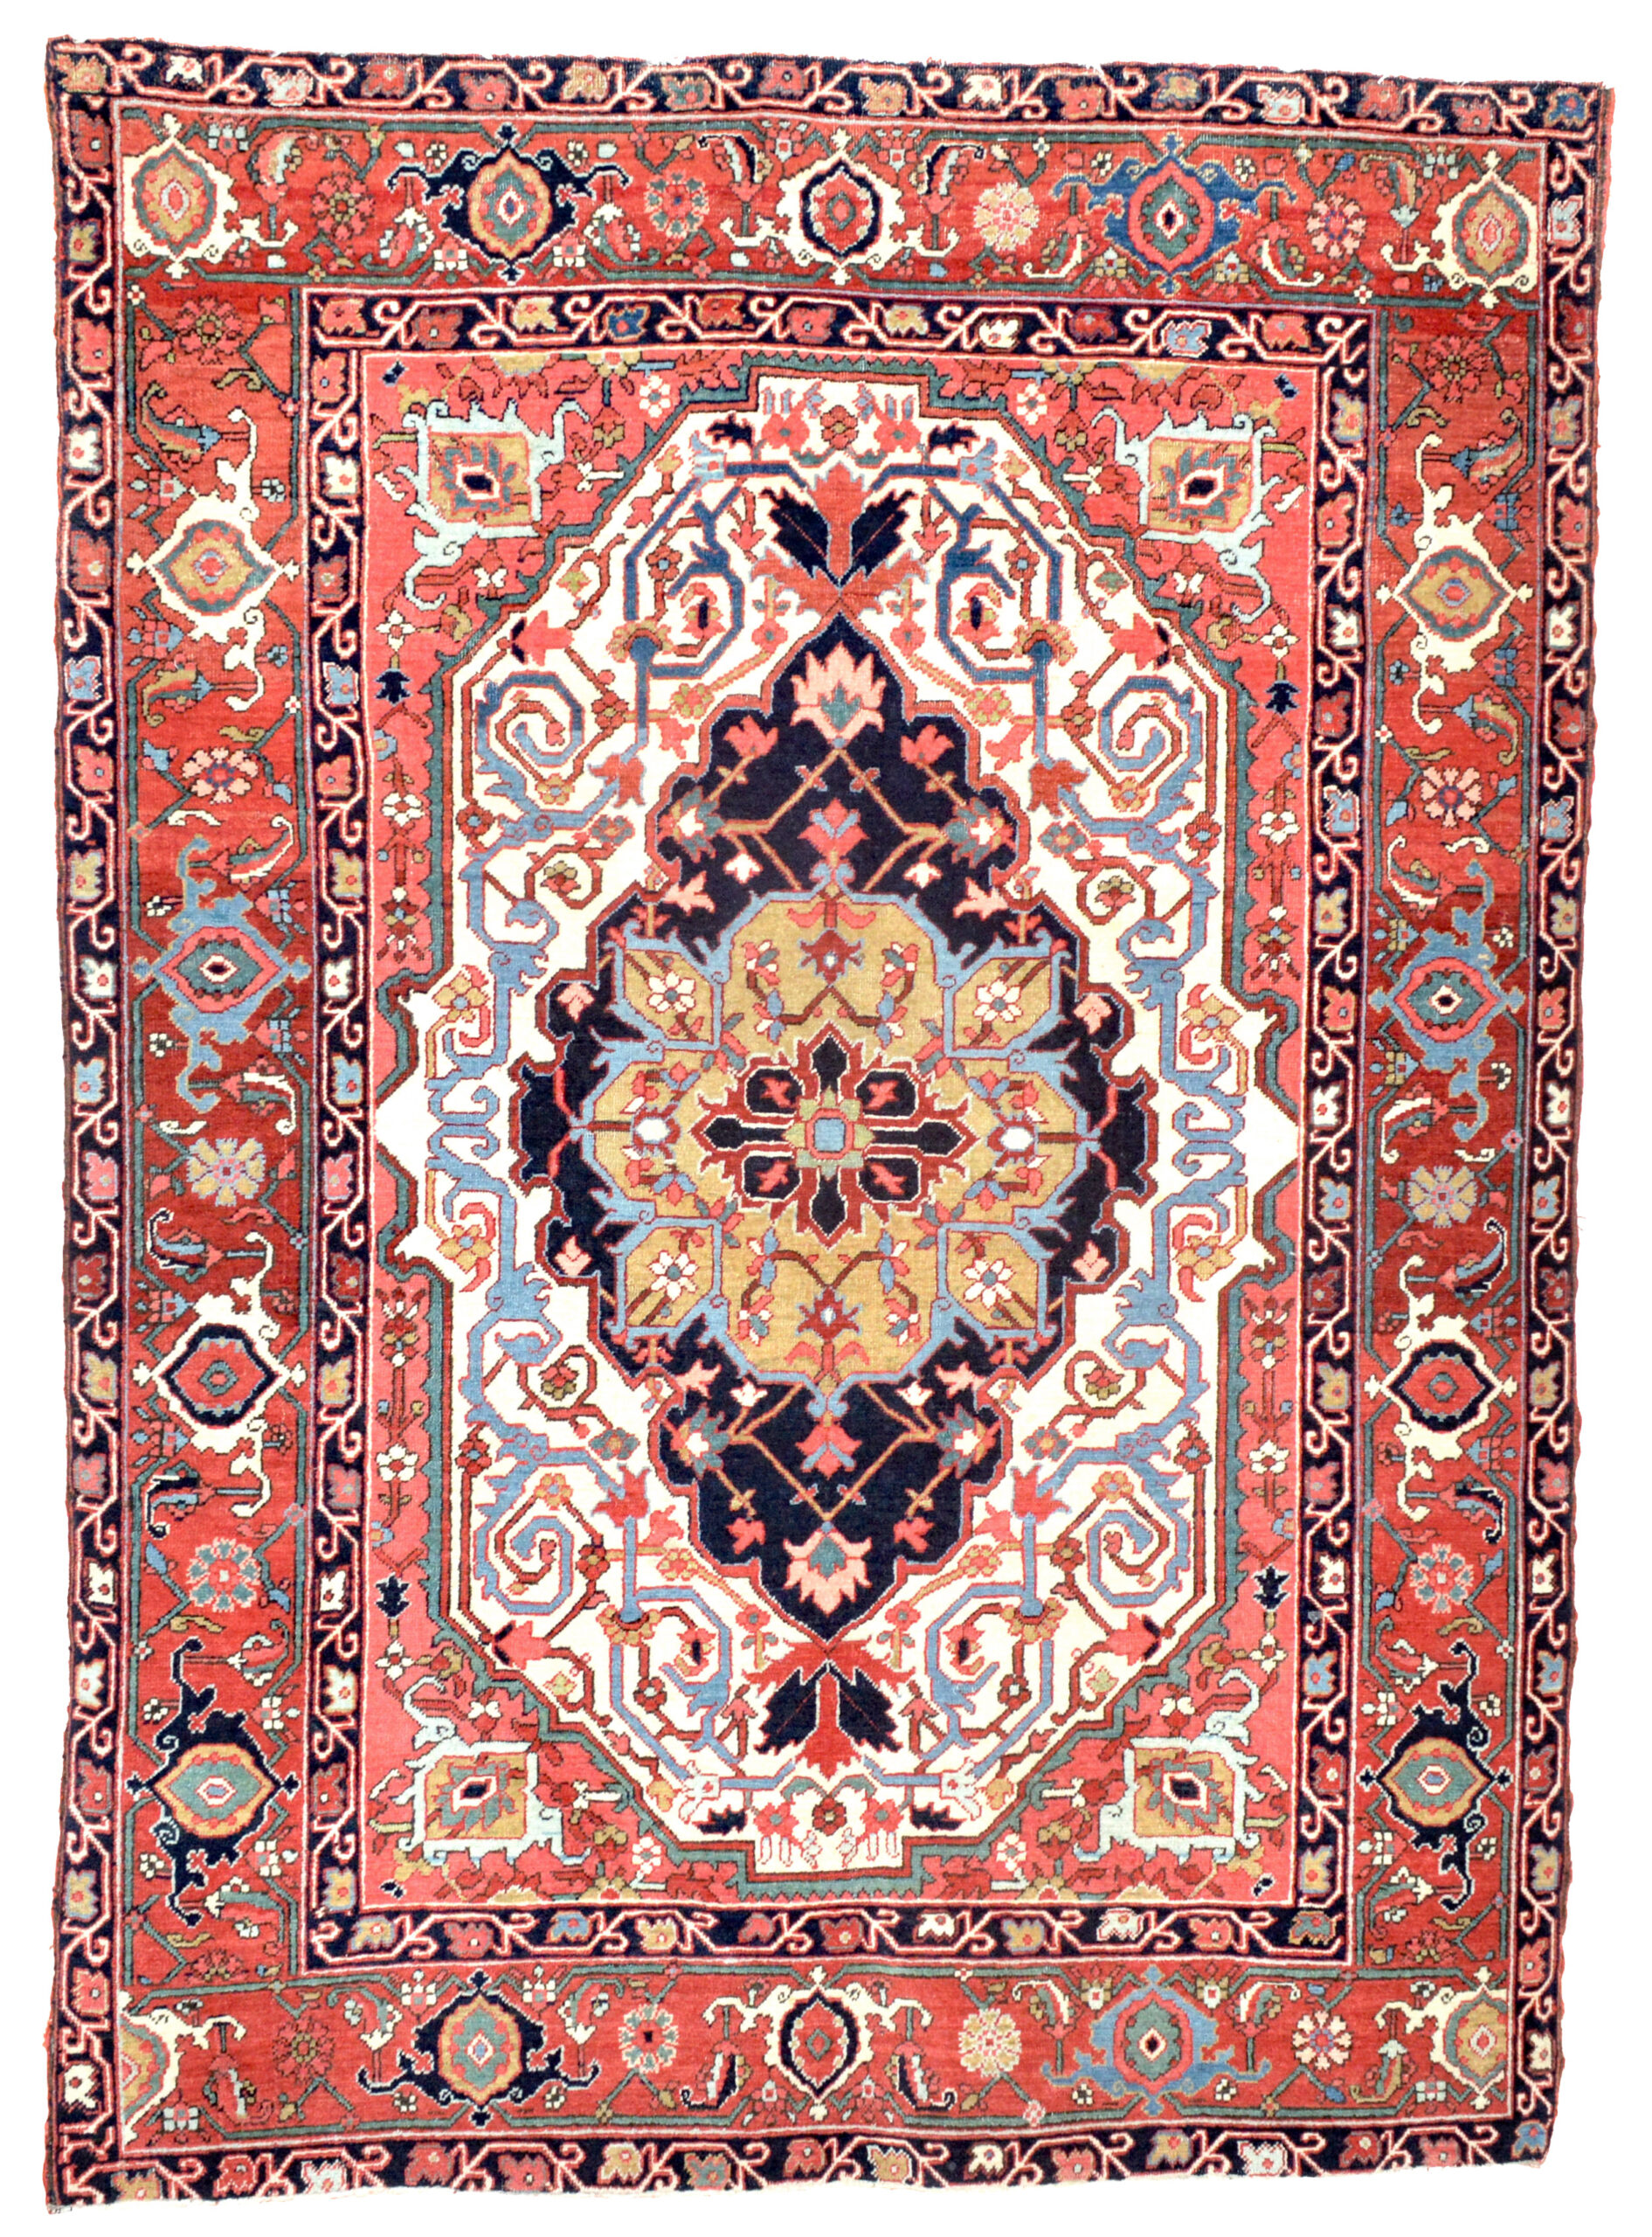 An outstanding antique Persian Heriz of the type often referred to as antique Serapi rugs. The ivory field contains a camel and navy medallion and is framed by coral corner spandrels and a brick red Turtle border, late 19th century. Douglas Stock Gallery, antique Oriental rugs, South Natick,MA